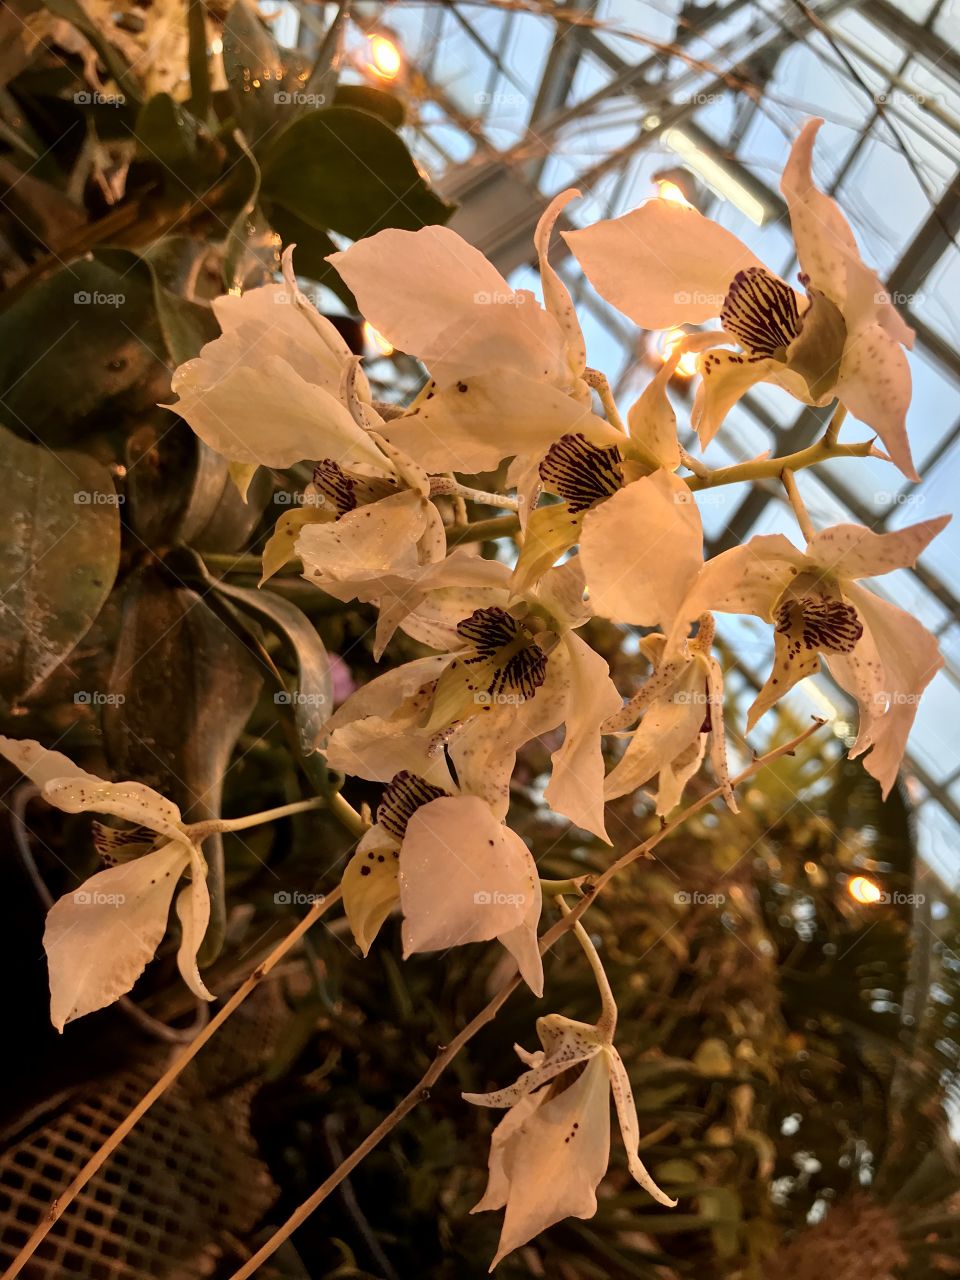 Beautiful photograph of a unique type of orchid located in a beautiful glass rooftop garden center